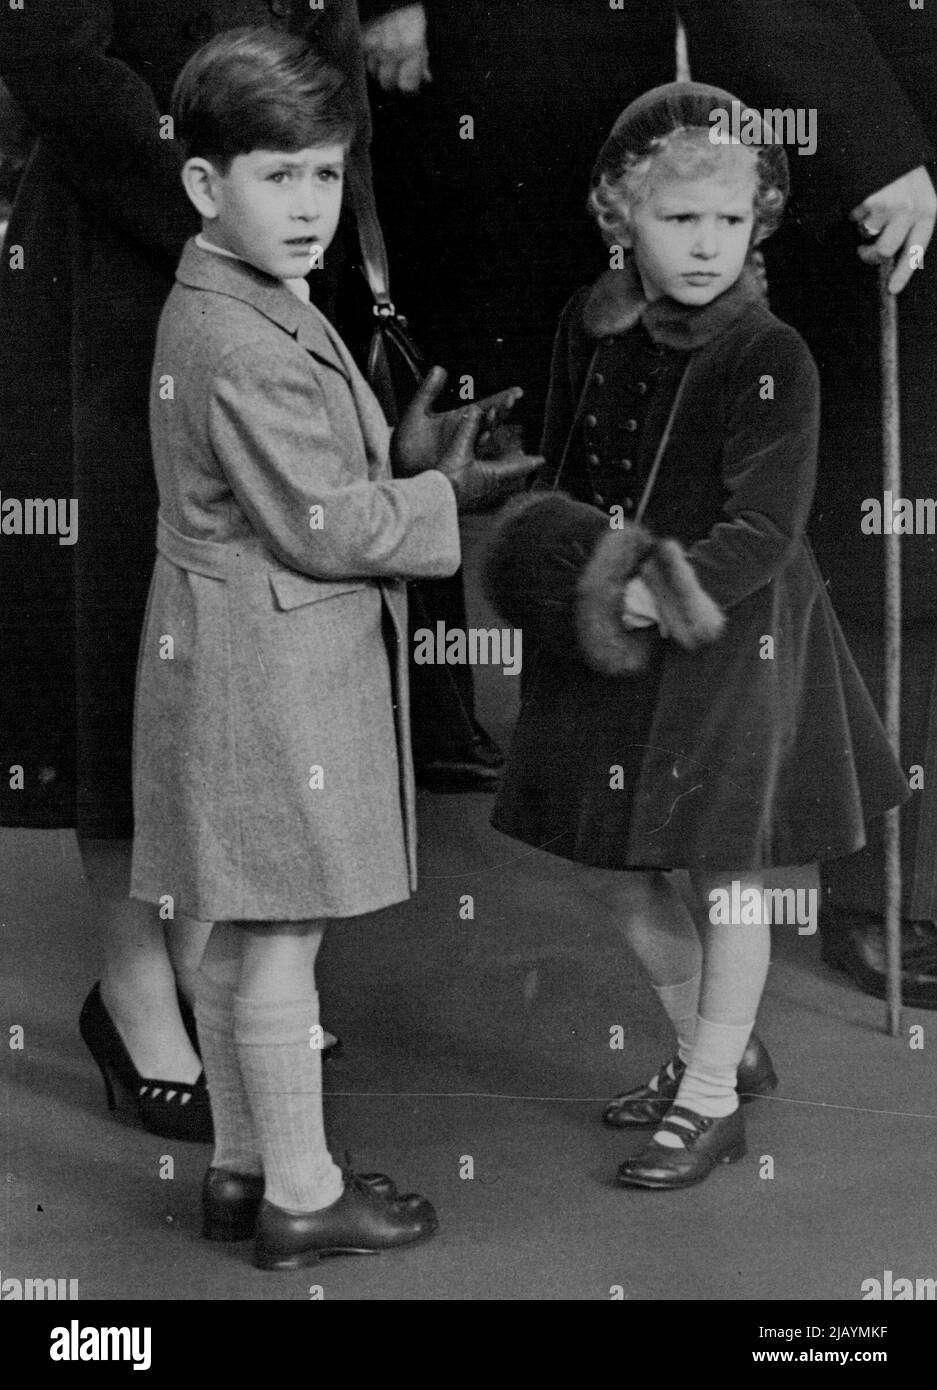 The Queen Mother Arrives Home Again -- The Queen Mother arrived home to-day her tour of America and Canada. The Queen, Duke of Edinburgh, Prince Charles and Princess Anne went to waterloo station to greet her on arrival from Southampton. This picture taken at the station this morning shows the two Royal children awaiting the arrival of their grandmother. November 24, 1954. (Photo by Daily Mail Contract Picture). Stock Photo